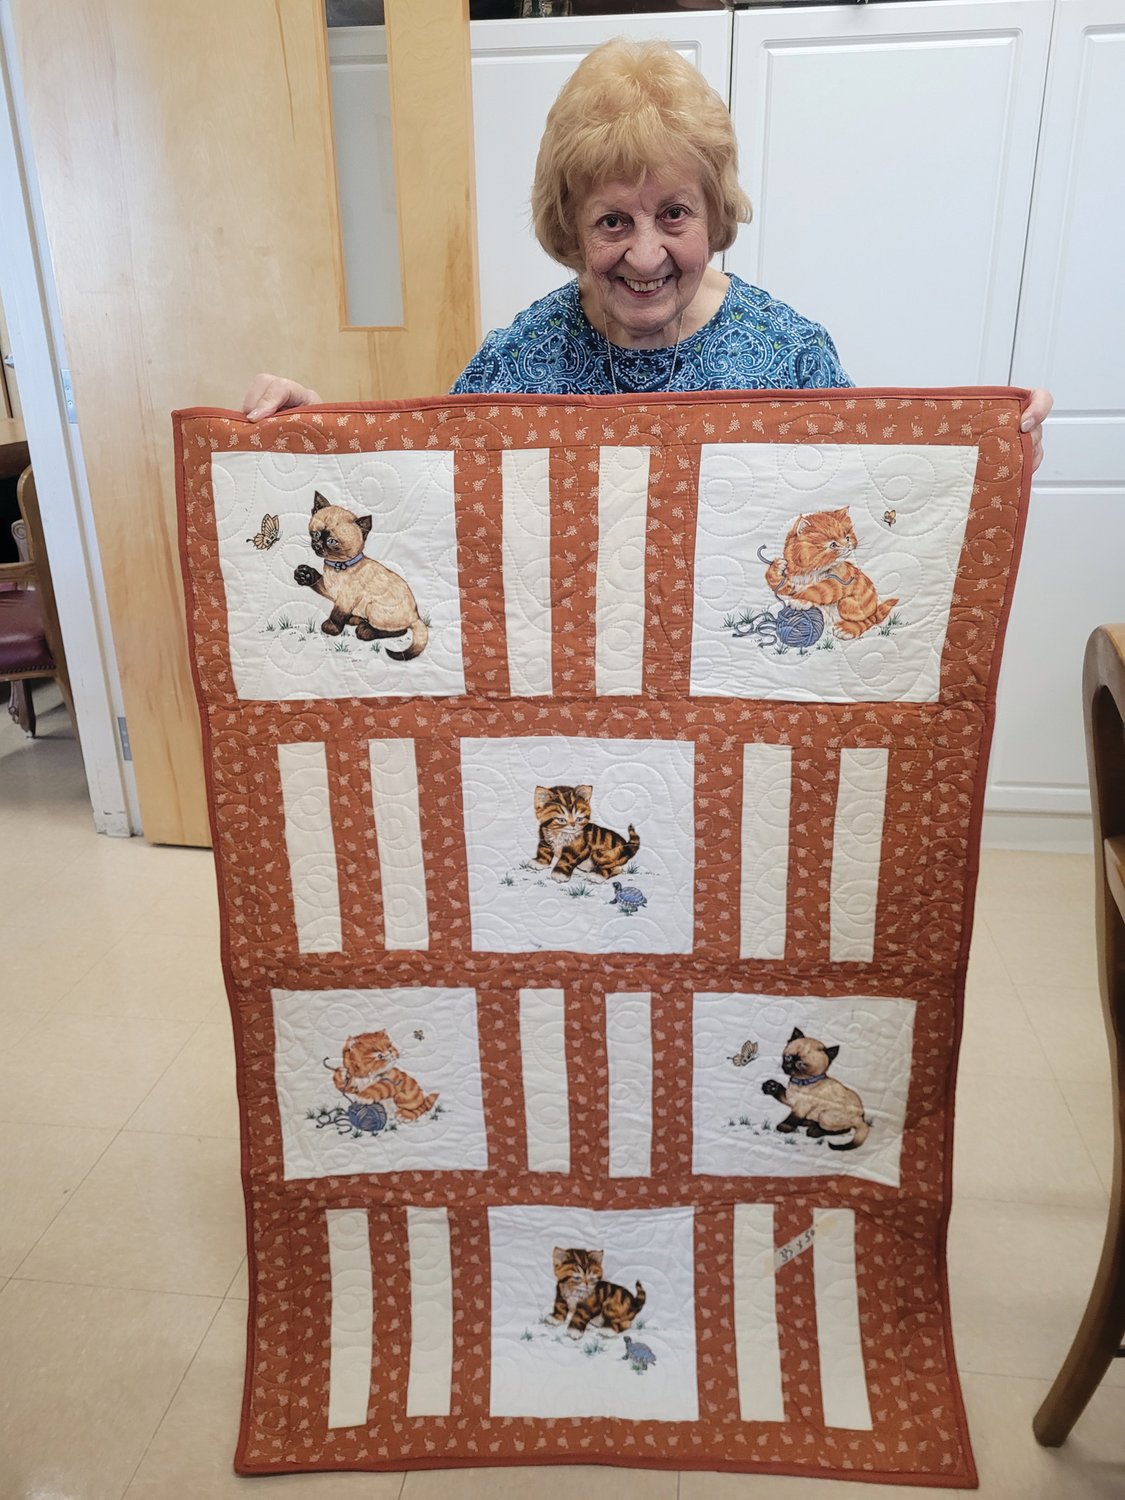 FELINE FRIENDS: Marie Lanzi unfurled one of her favorite recent quilting master patchworks. The quilt was one of more than 50 donated to community service organization Children’s Friend and Services.